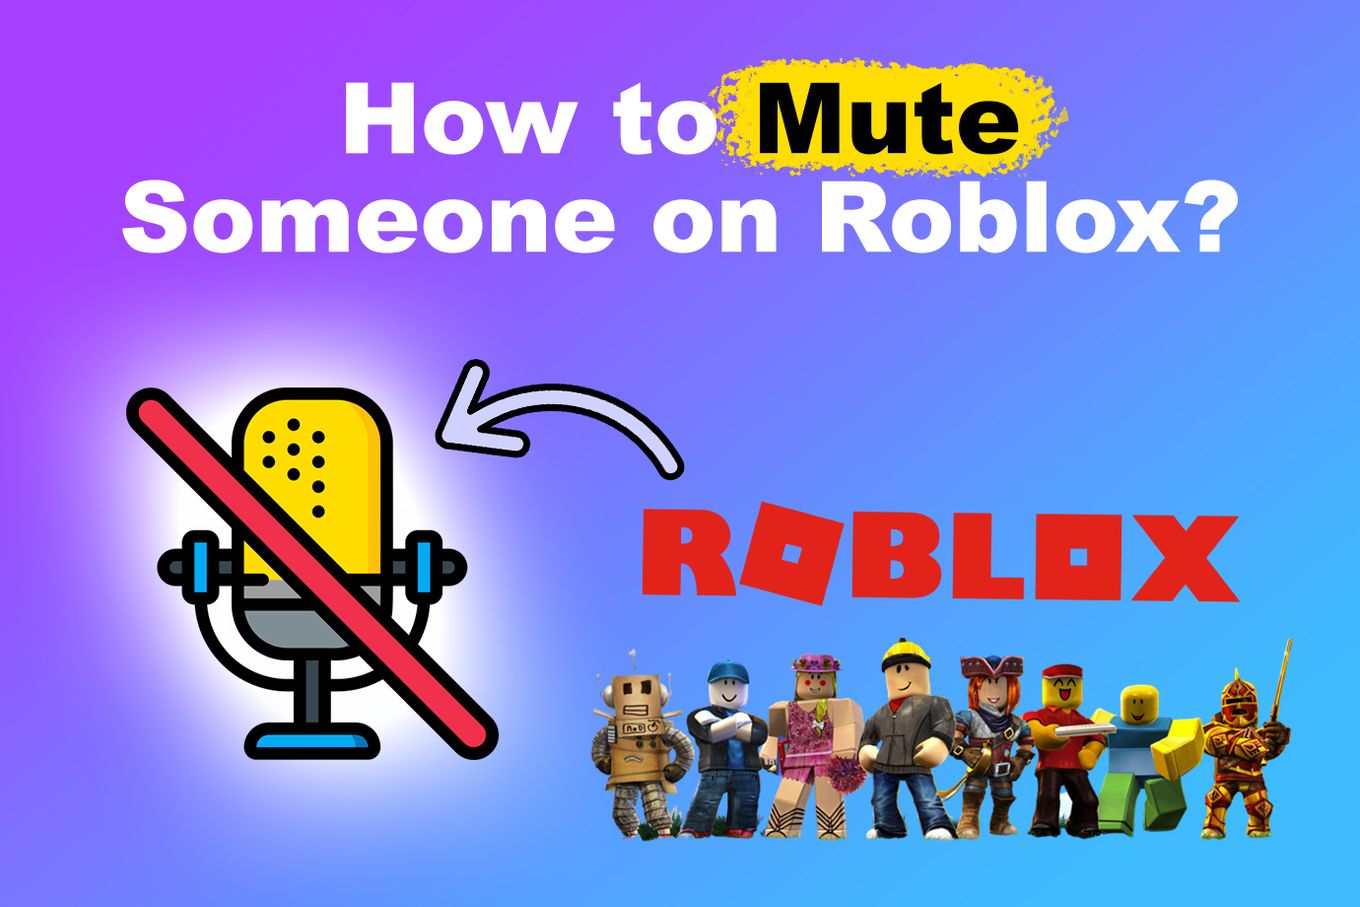 How To Mute Someone on Roblox